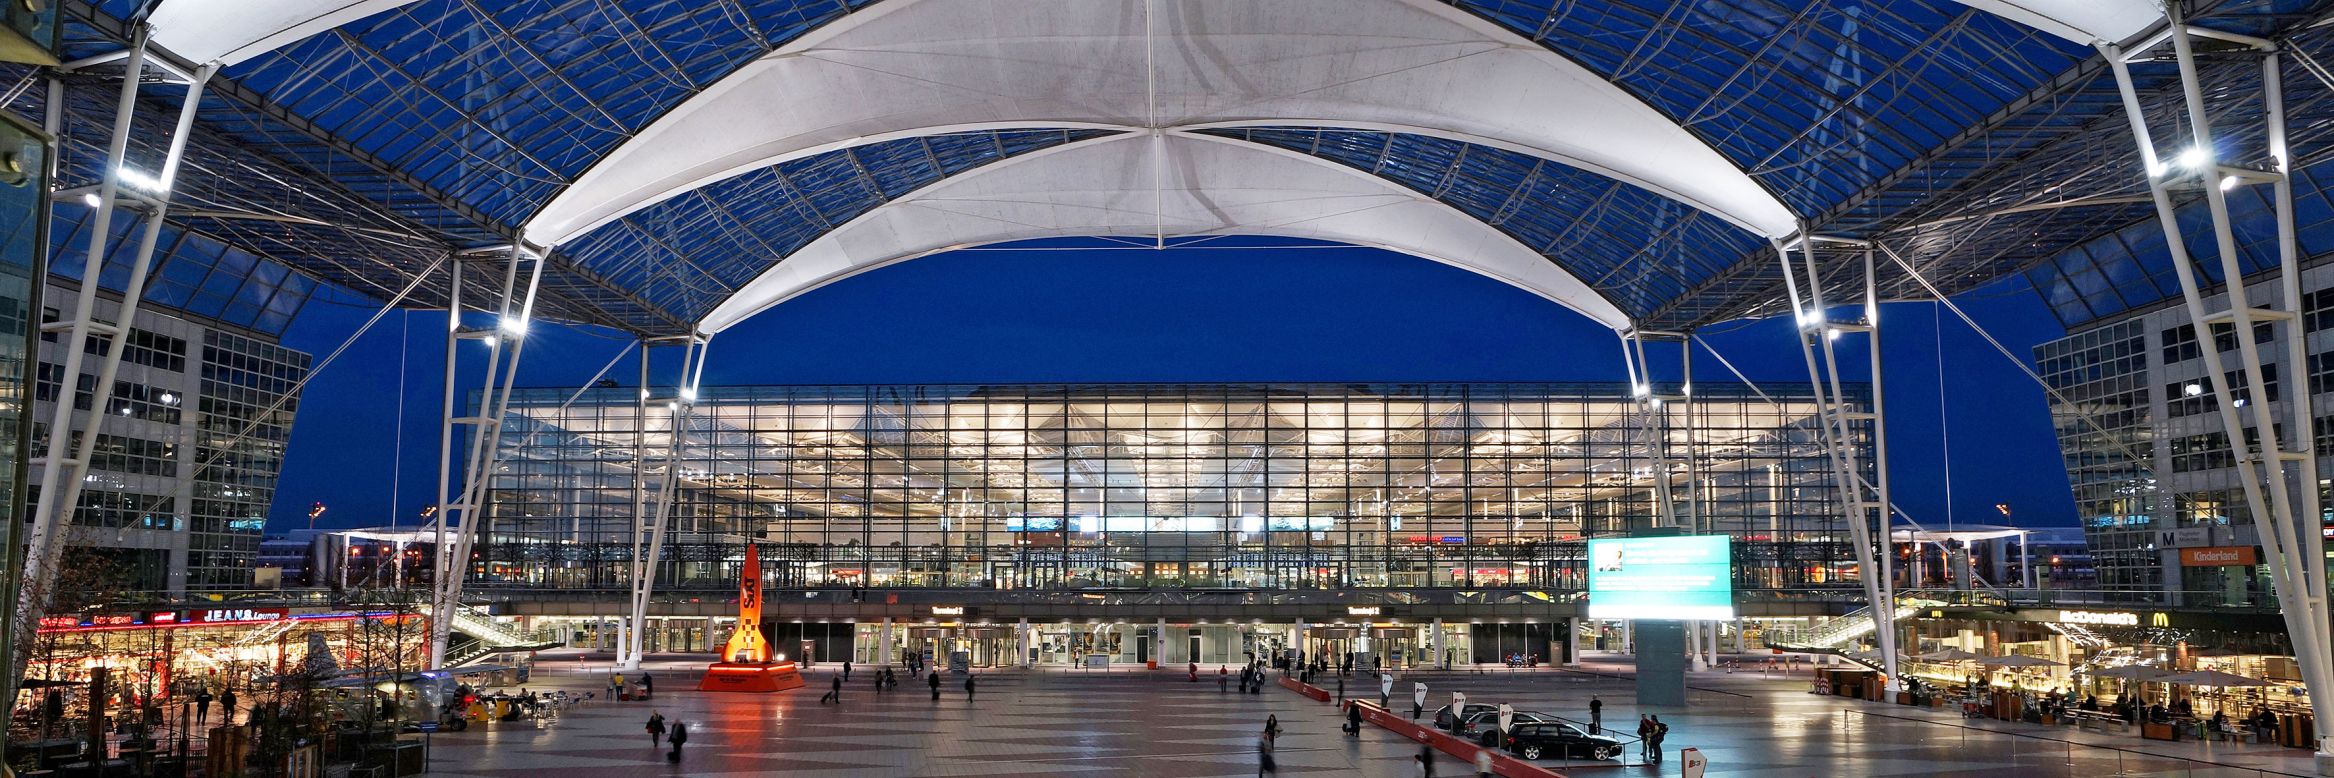 Munich Airport will open its new Terminal 2 satellite later in 2015, potentially increasing annual capacity to 17 million passengers.